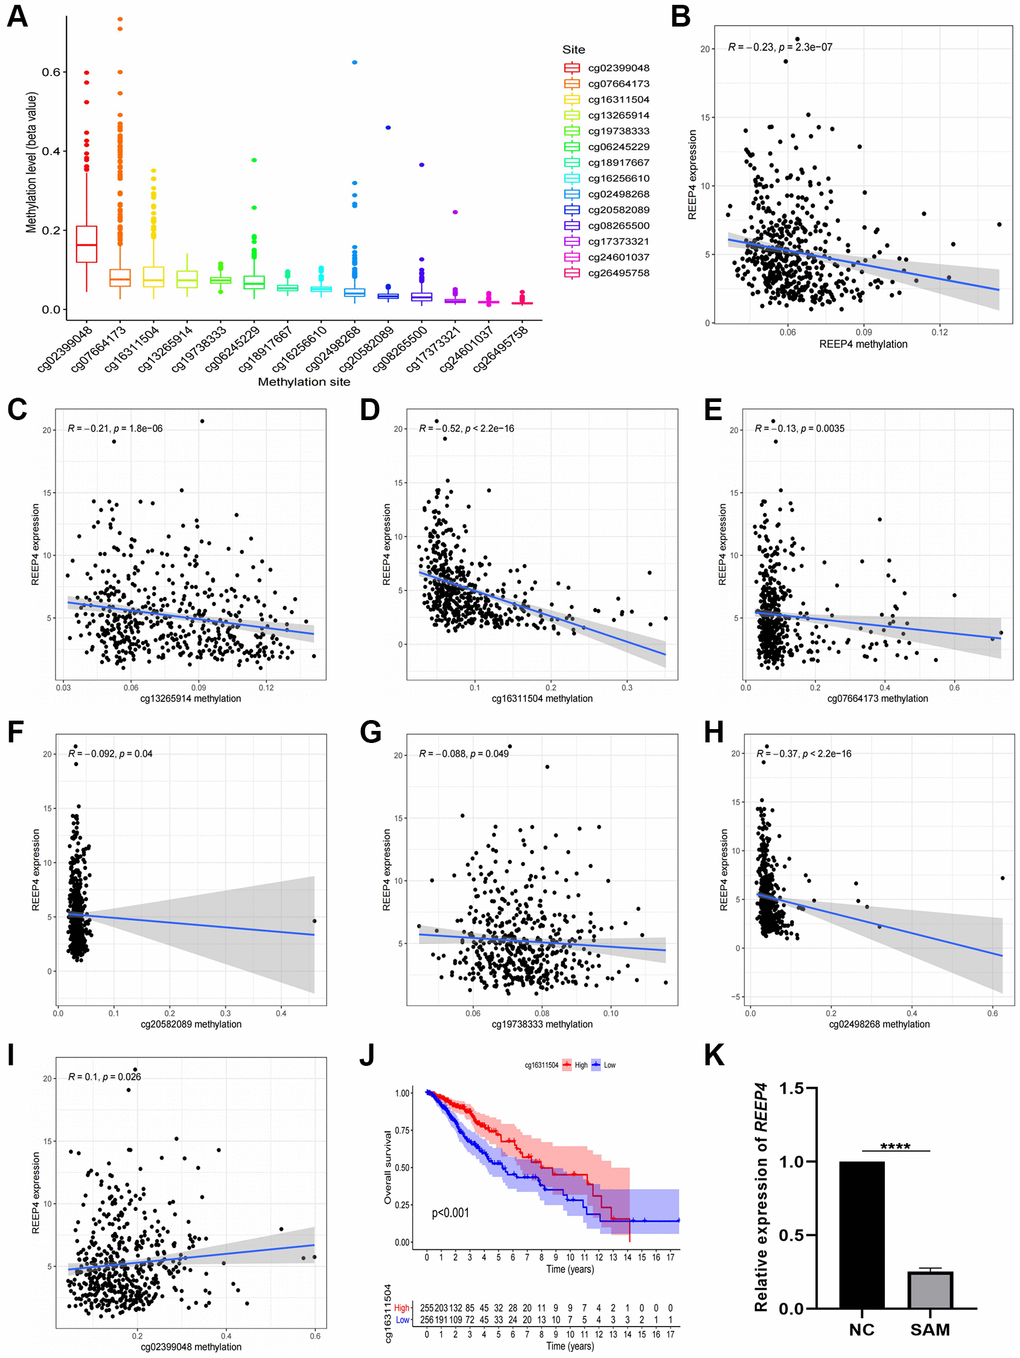 Methylation level of receptor accessory protein 4 (REEP4) in lower-grade glioma (LGG) based on the TCGA database. (A) Methylation sites of REEP4 in LGG. (B) The expression level of REEP4 is negatively correlated with the total methylation level. (C–H) The expression level of REEP4 is negatively correlated with methylation sites cg13265914, cg16311504, cg07664173, cg20582089, cg19738333 and cg02498268. (I) The expression level of REEP4 is positively correlated with the methylation site cg02399048. (J) Effect of methylation site cg16311504 on the overall survival of patients with LGG. (K) Real-time quantitative polymerase chain reaction showing that the expression level of REEP4 was significantly inhibited by SAM. ****P 